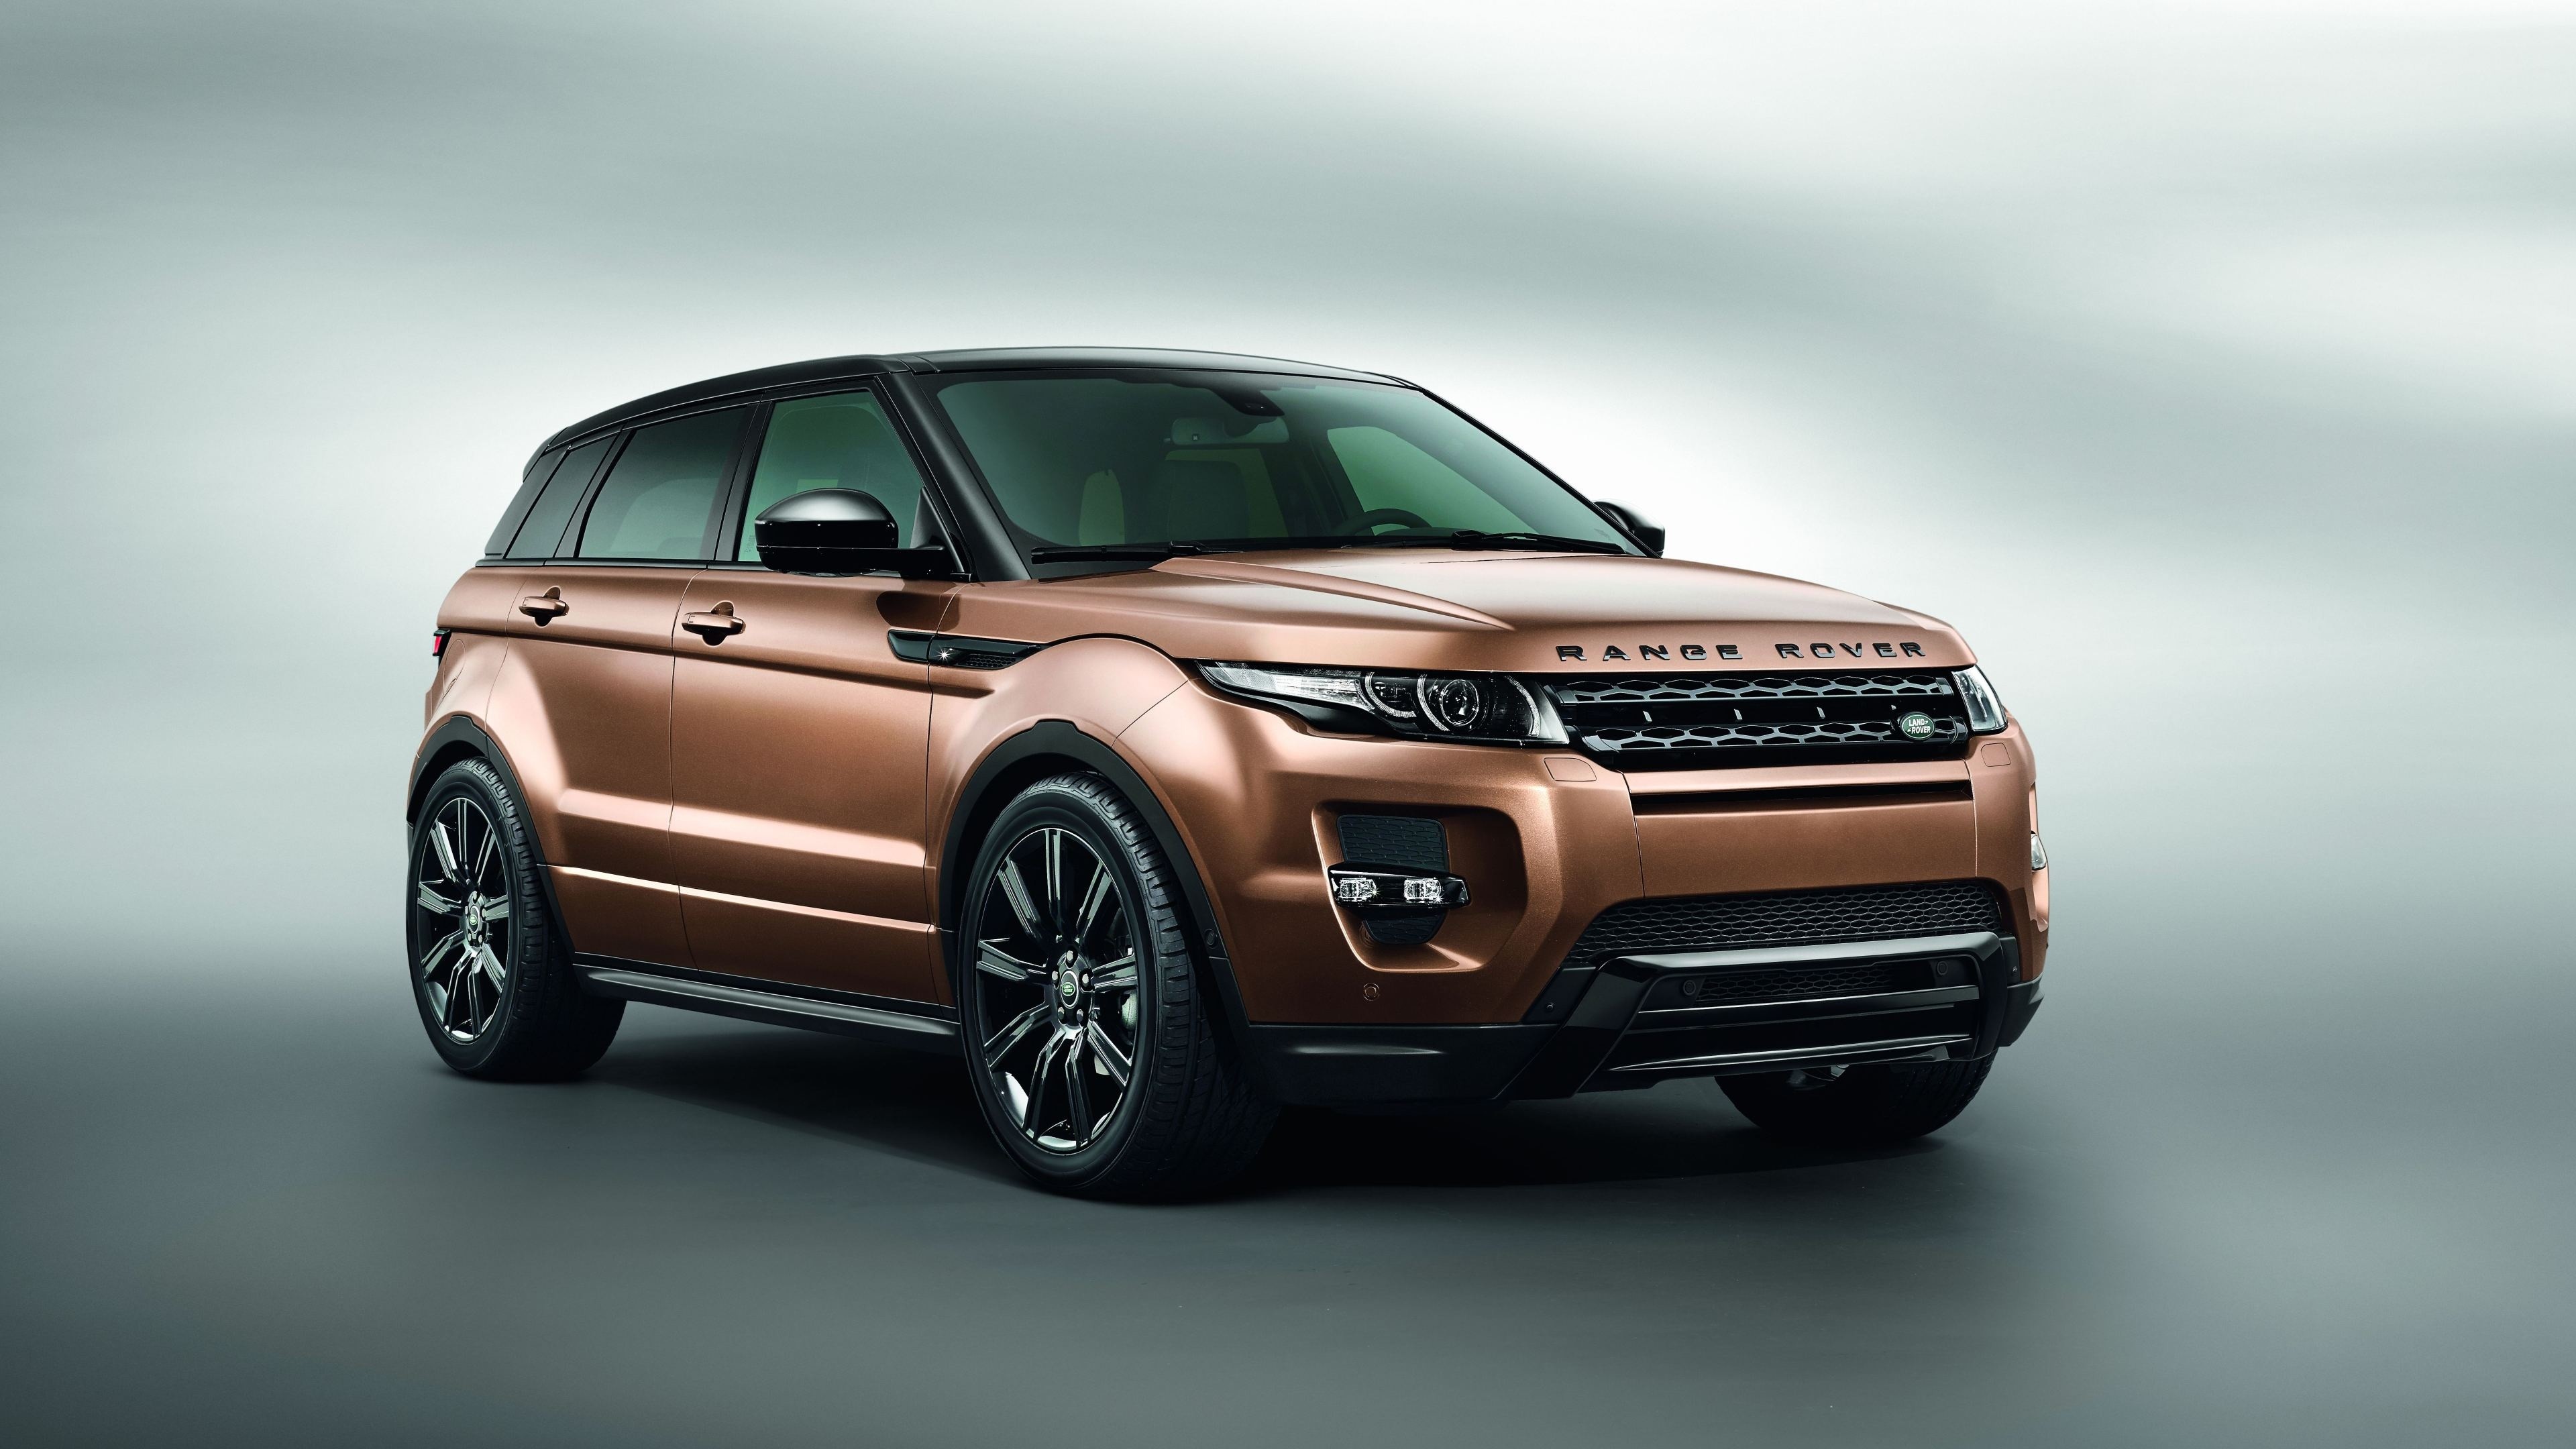 3840x2160 2014 Range Rover Wallpapers HD Resolution with HD Wallpaper Resolution   px 775.61 KB Car Hd